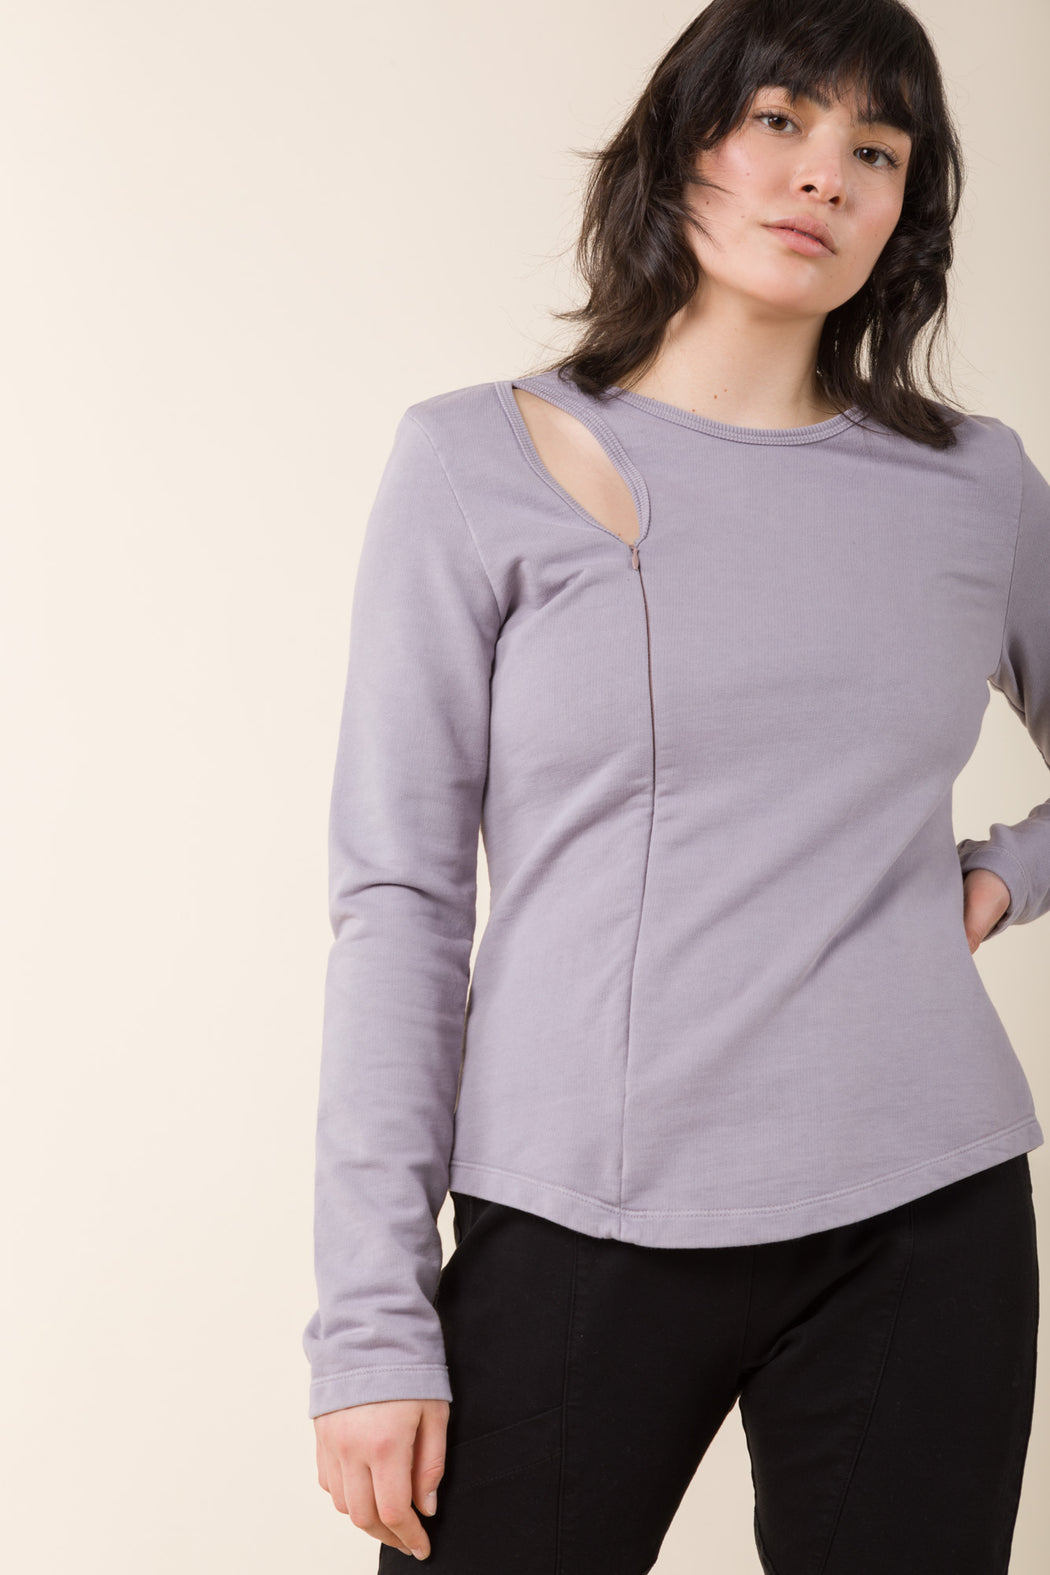 The Tendril Sweater employs multiple necklines to appear as layers, exposing the clavicle. The softness and ease of a sweatshirt with a minimal, futuristic appearance. 